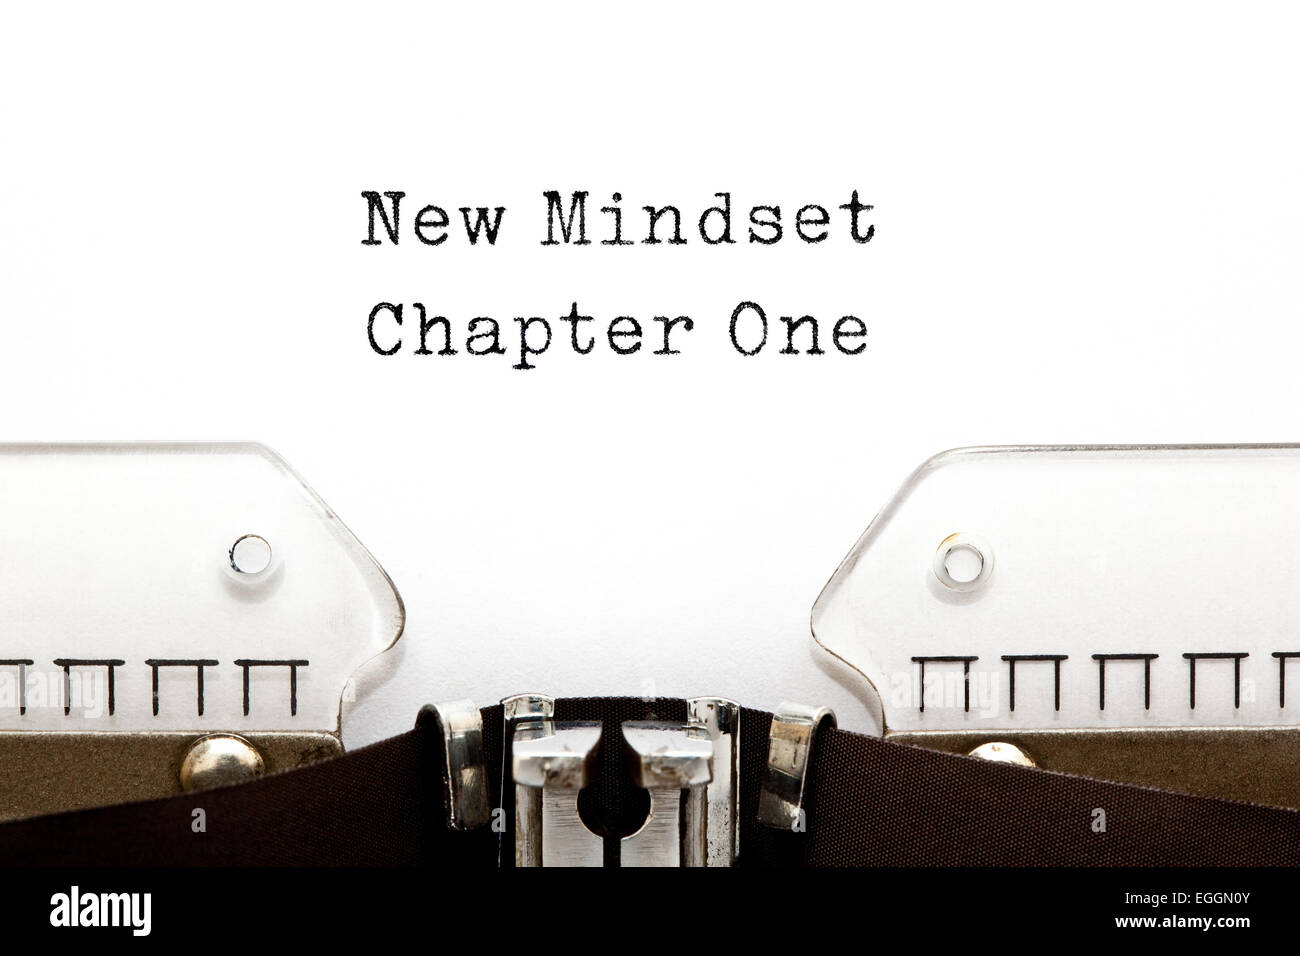 New Mindset Chapter One printed on an old typewriter. Stock Photo